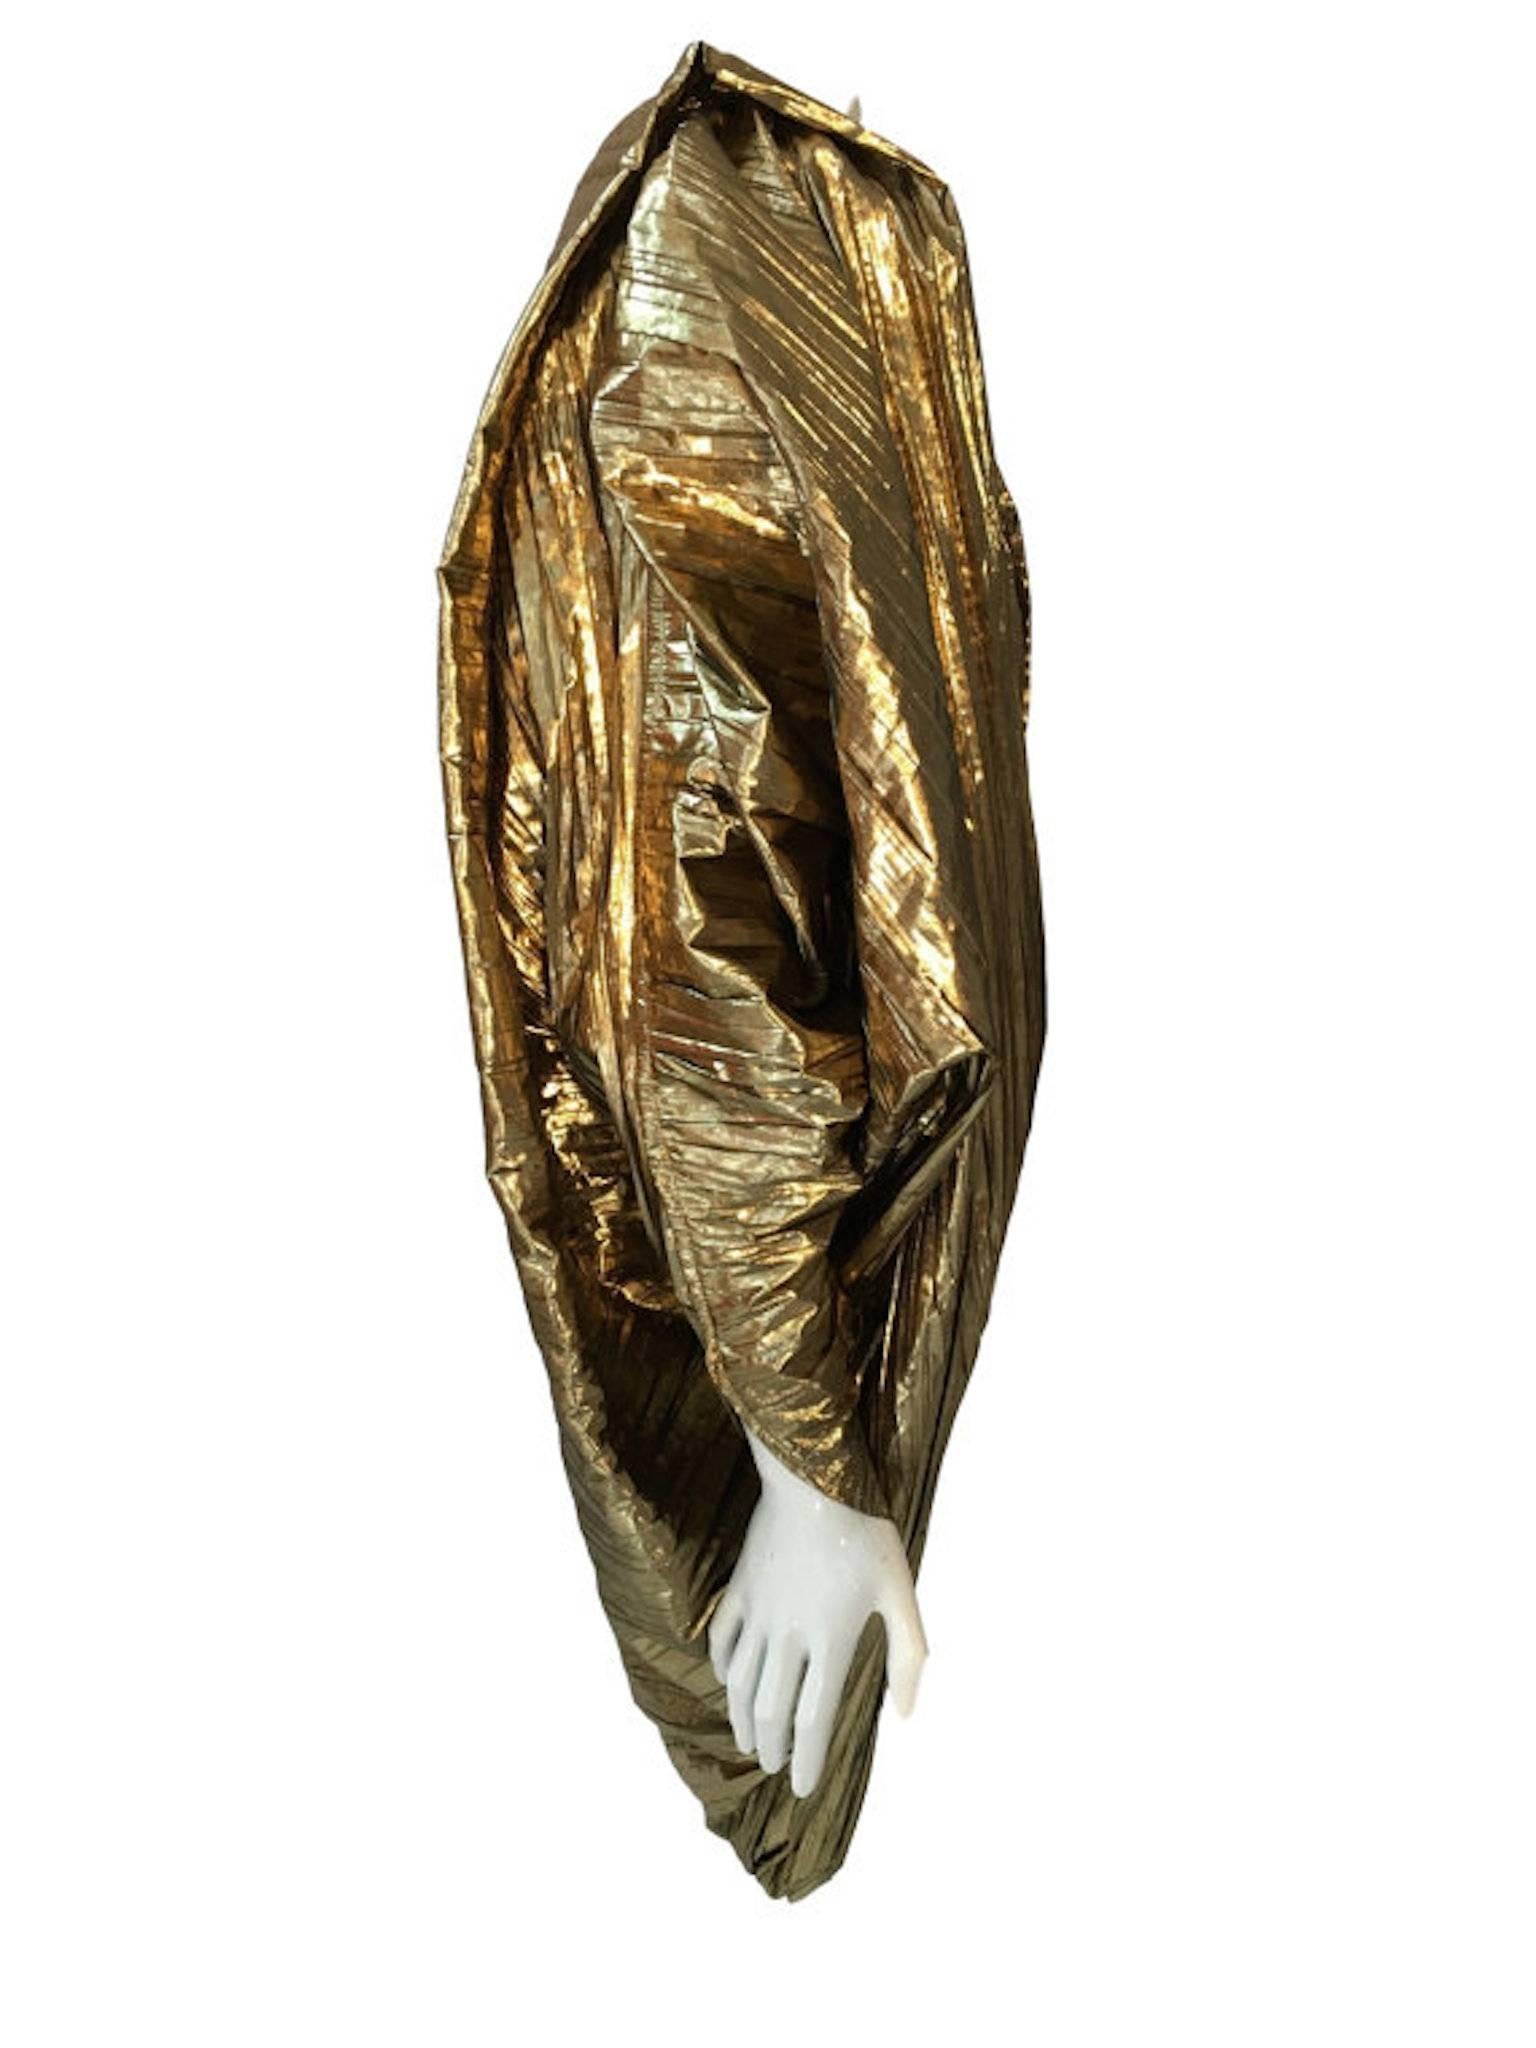 A fabulous and outrageous vintage metallic evening jacket. Made pleated from gold metallic material, has fitted cuffs and cocoon shaped body. Has shoulder pads. Labelled 